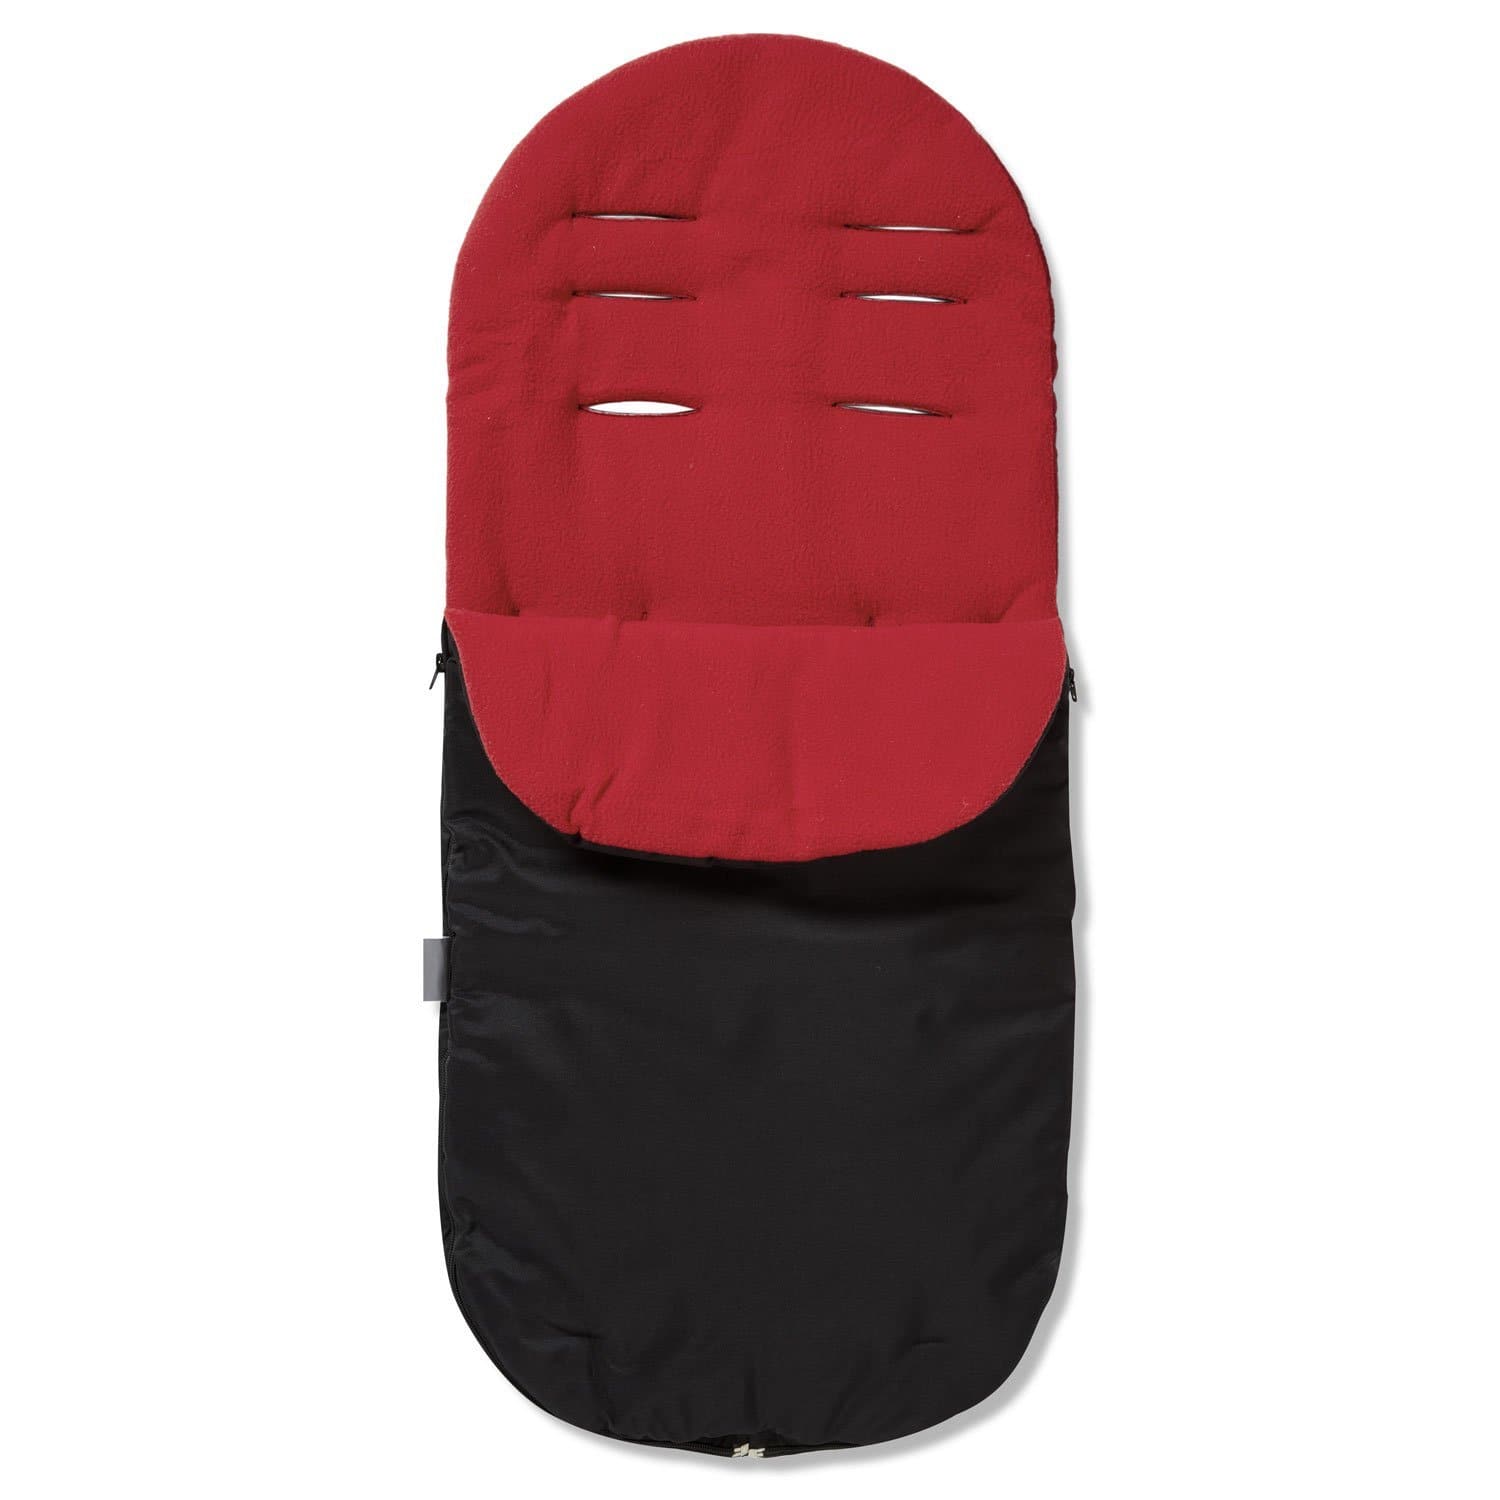 Footmuff / Cosy Toes Compatible with Stokke - Red / Fits All Models | For Your Little One